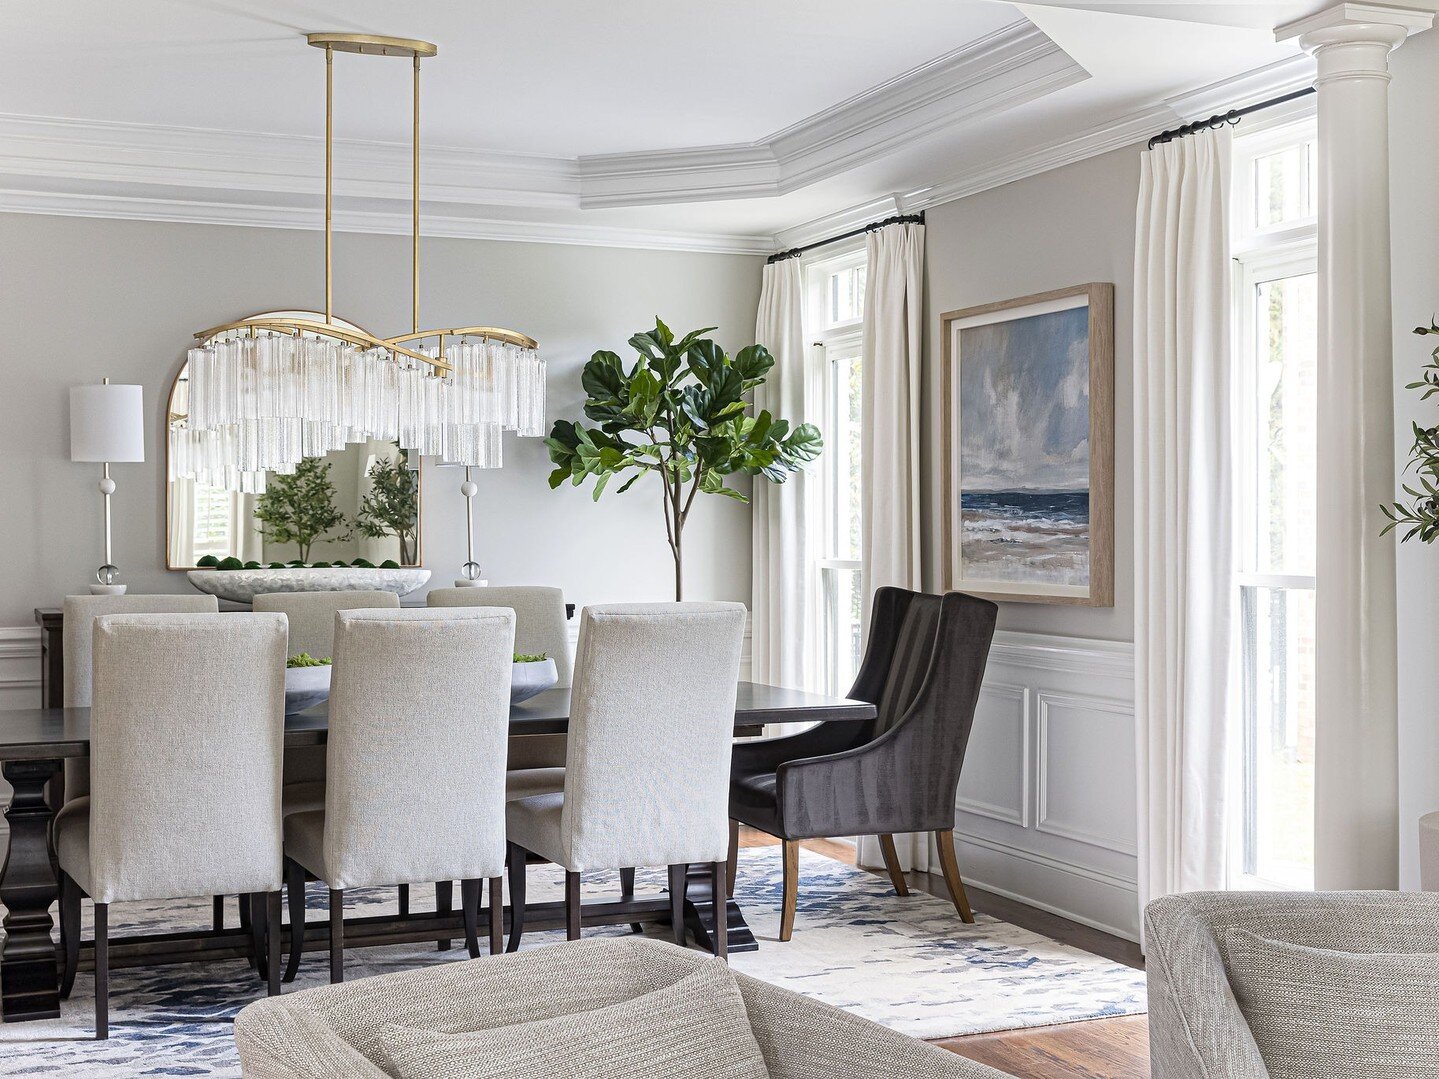 For close to a decade, Sara Lynn Brennan Interiors has been acclaimed as the go-to Charlotte interior designer, representing the next wave of design taste-making. My portfolio runs the gamut from custom new builds, large-scale renovations, and full-s